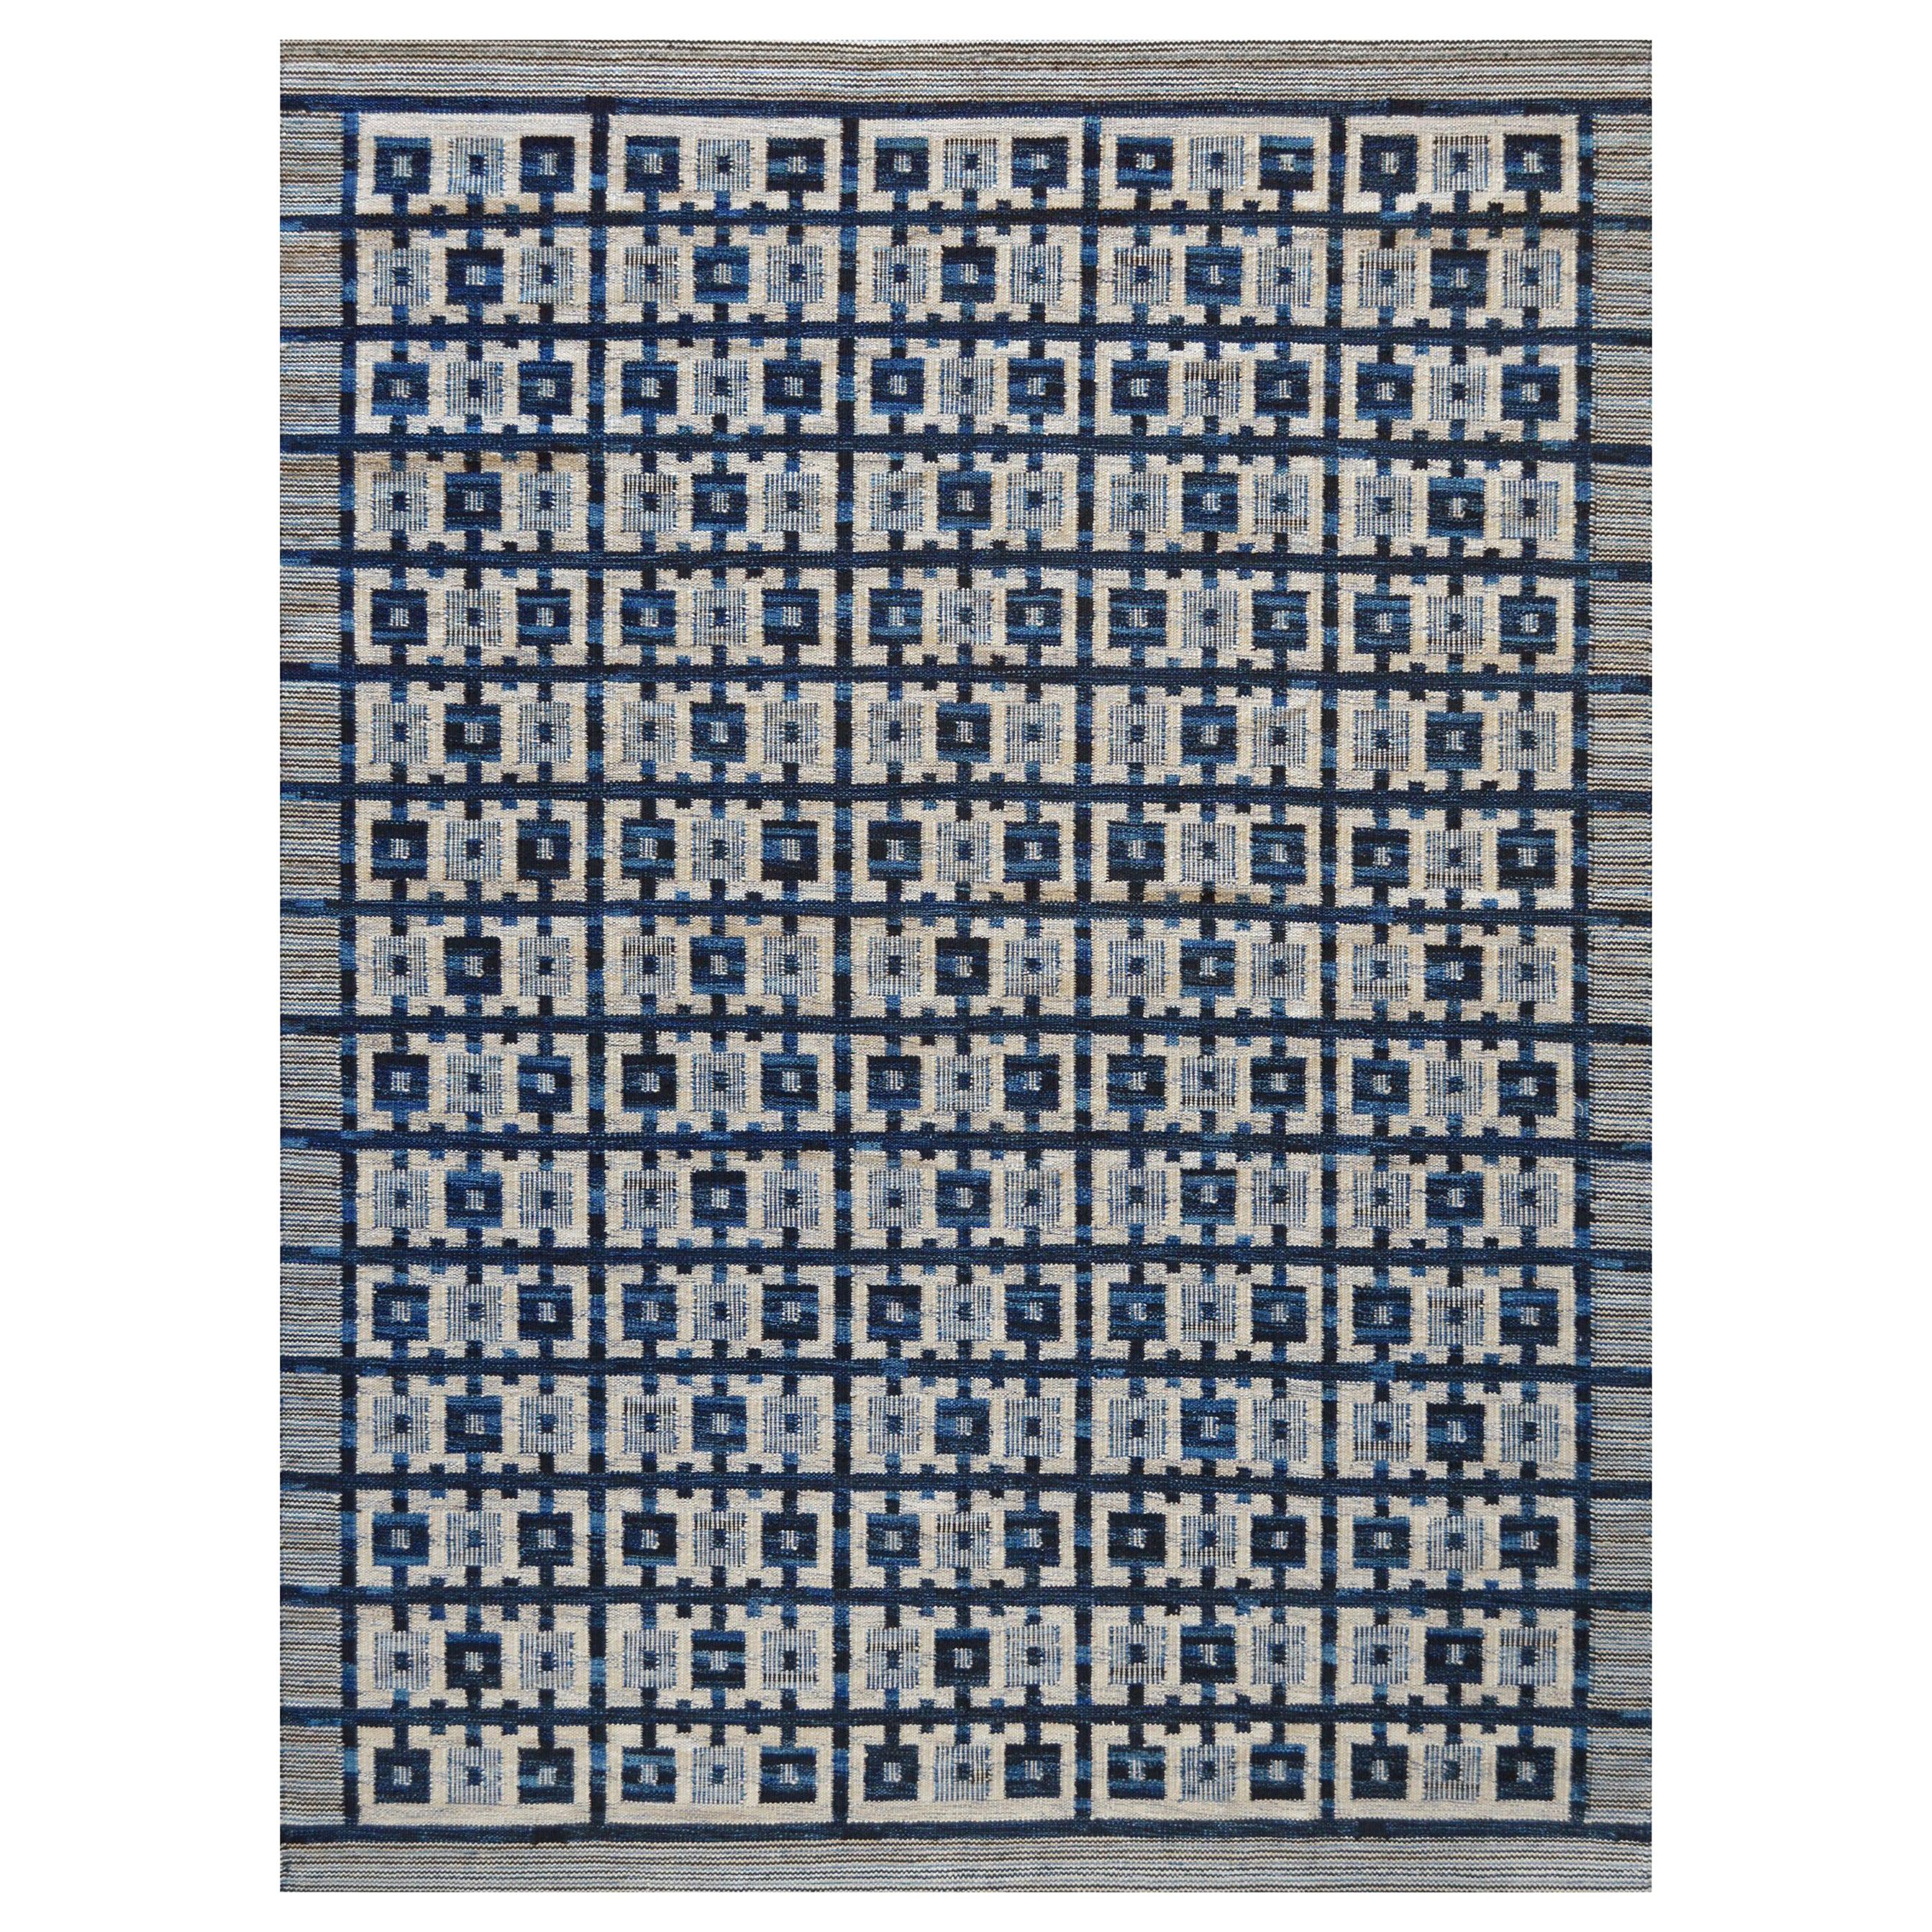 Swedish-Inspired Flat-Weave Rug For Sale